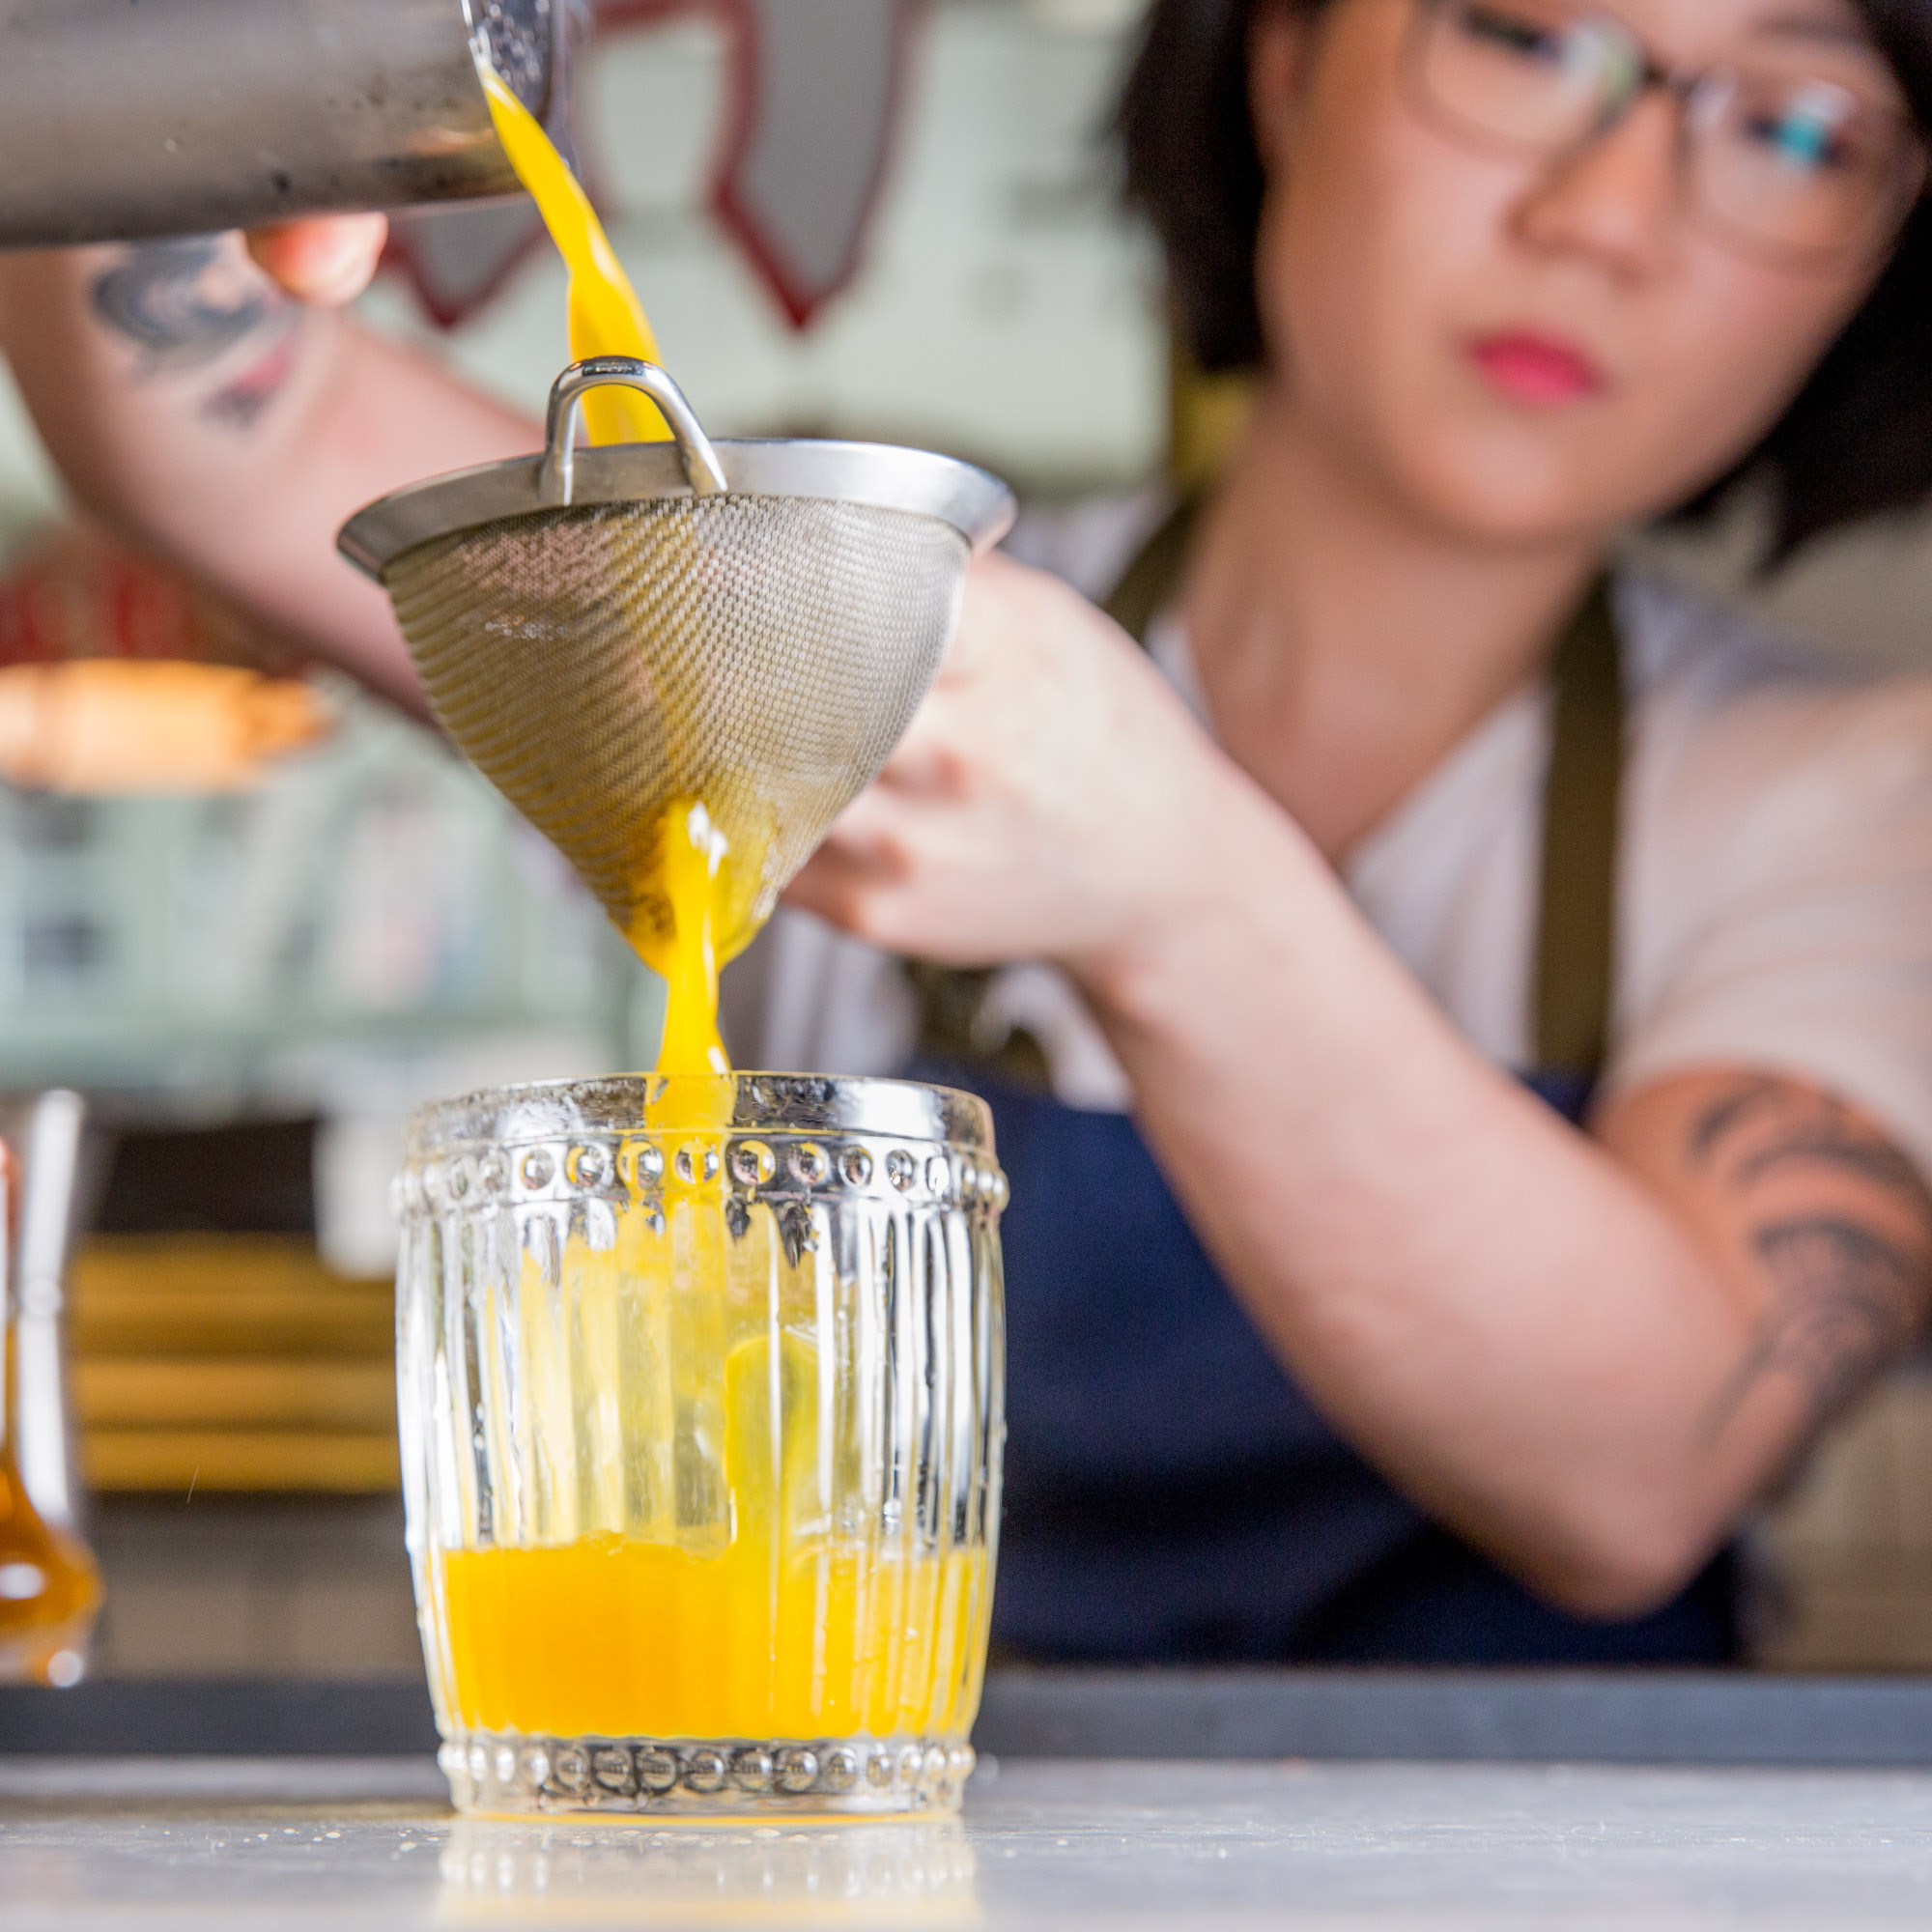 Bartender pouring a cocktail in New York city.